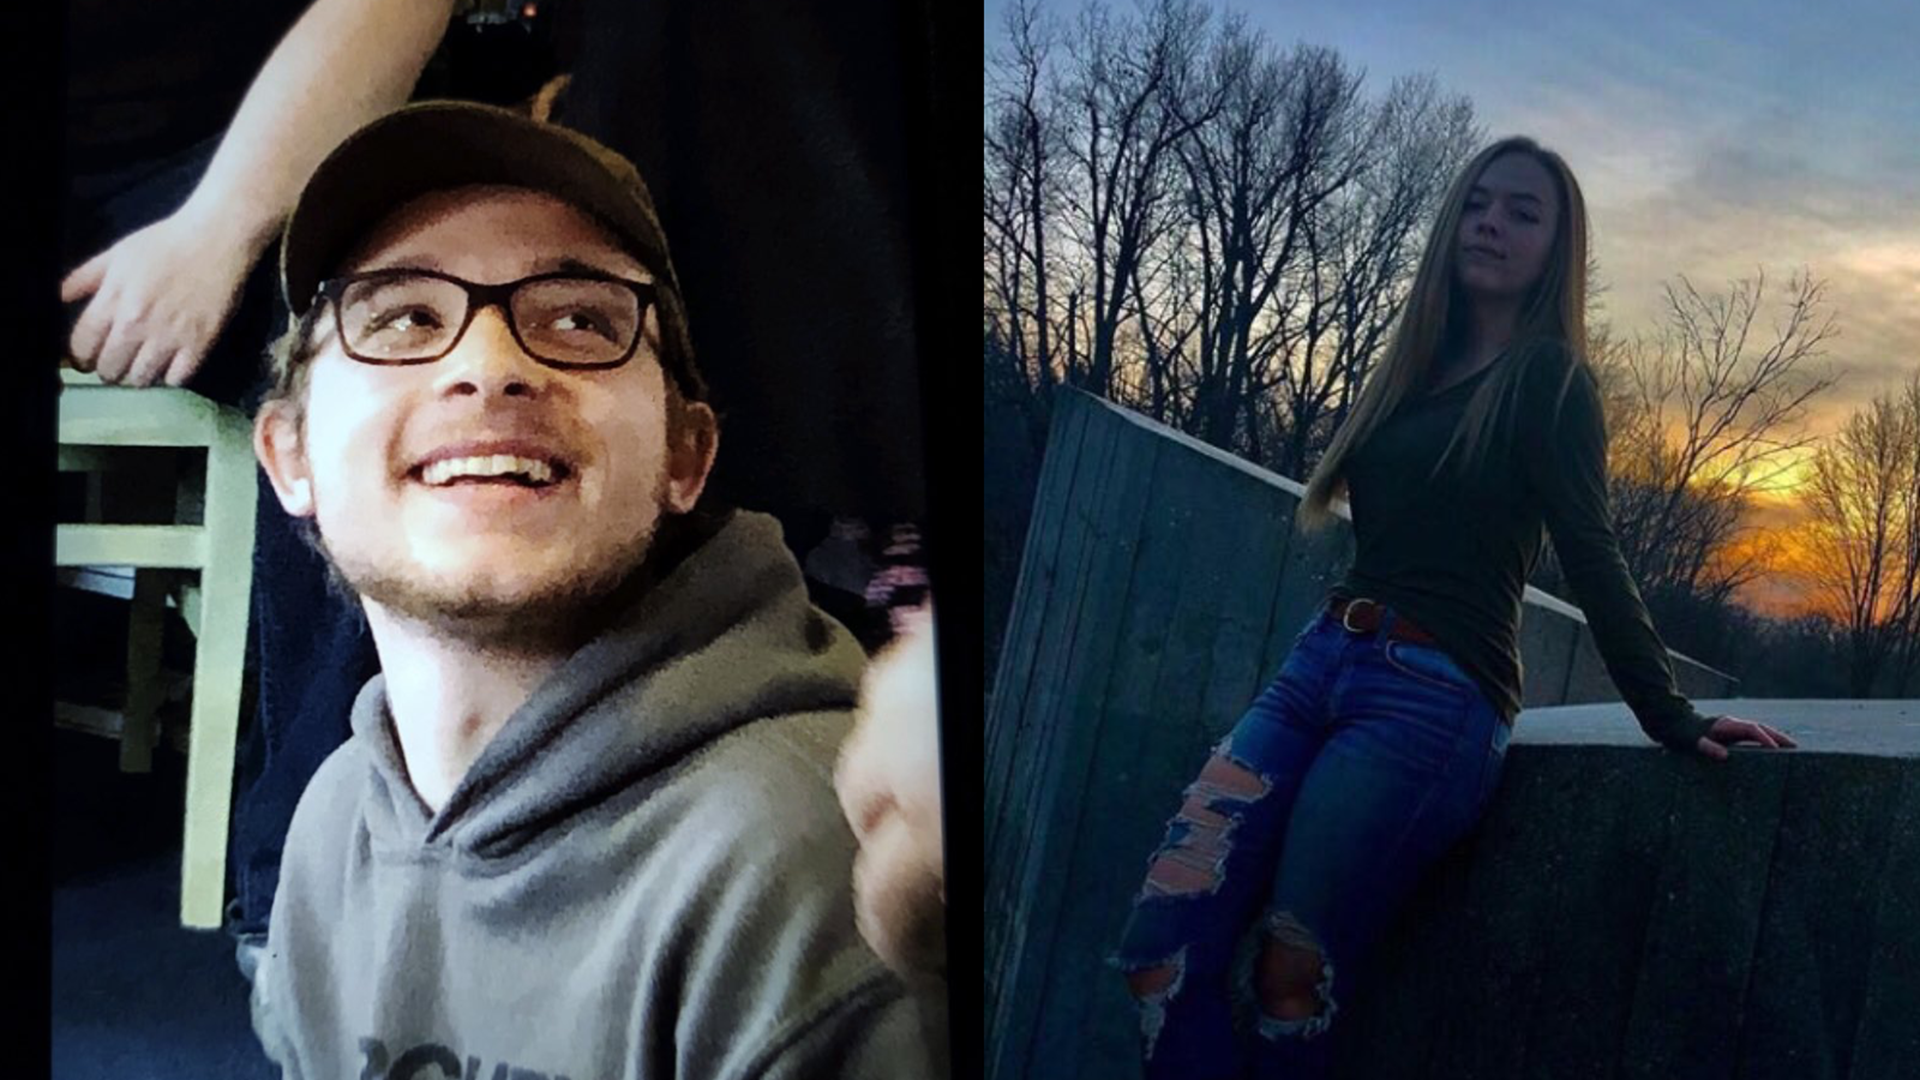 Police are searching for two teens in Ottawa County—one who fell into Lake Michigan and another who disappeared after a New Year's Eve party.